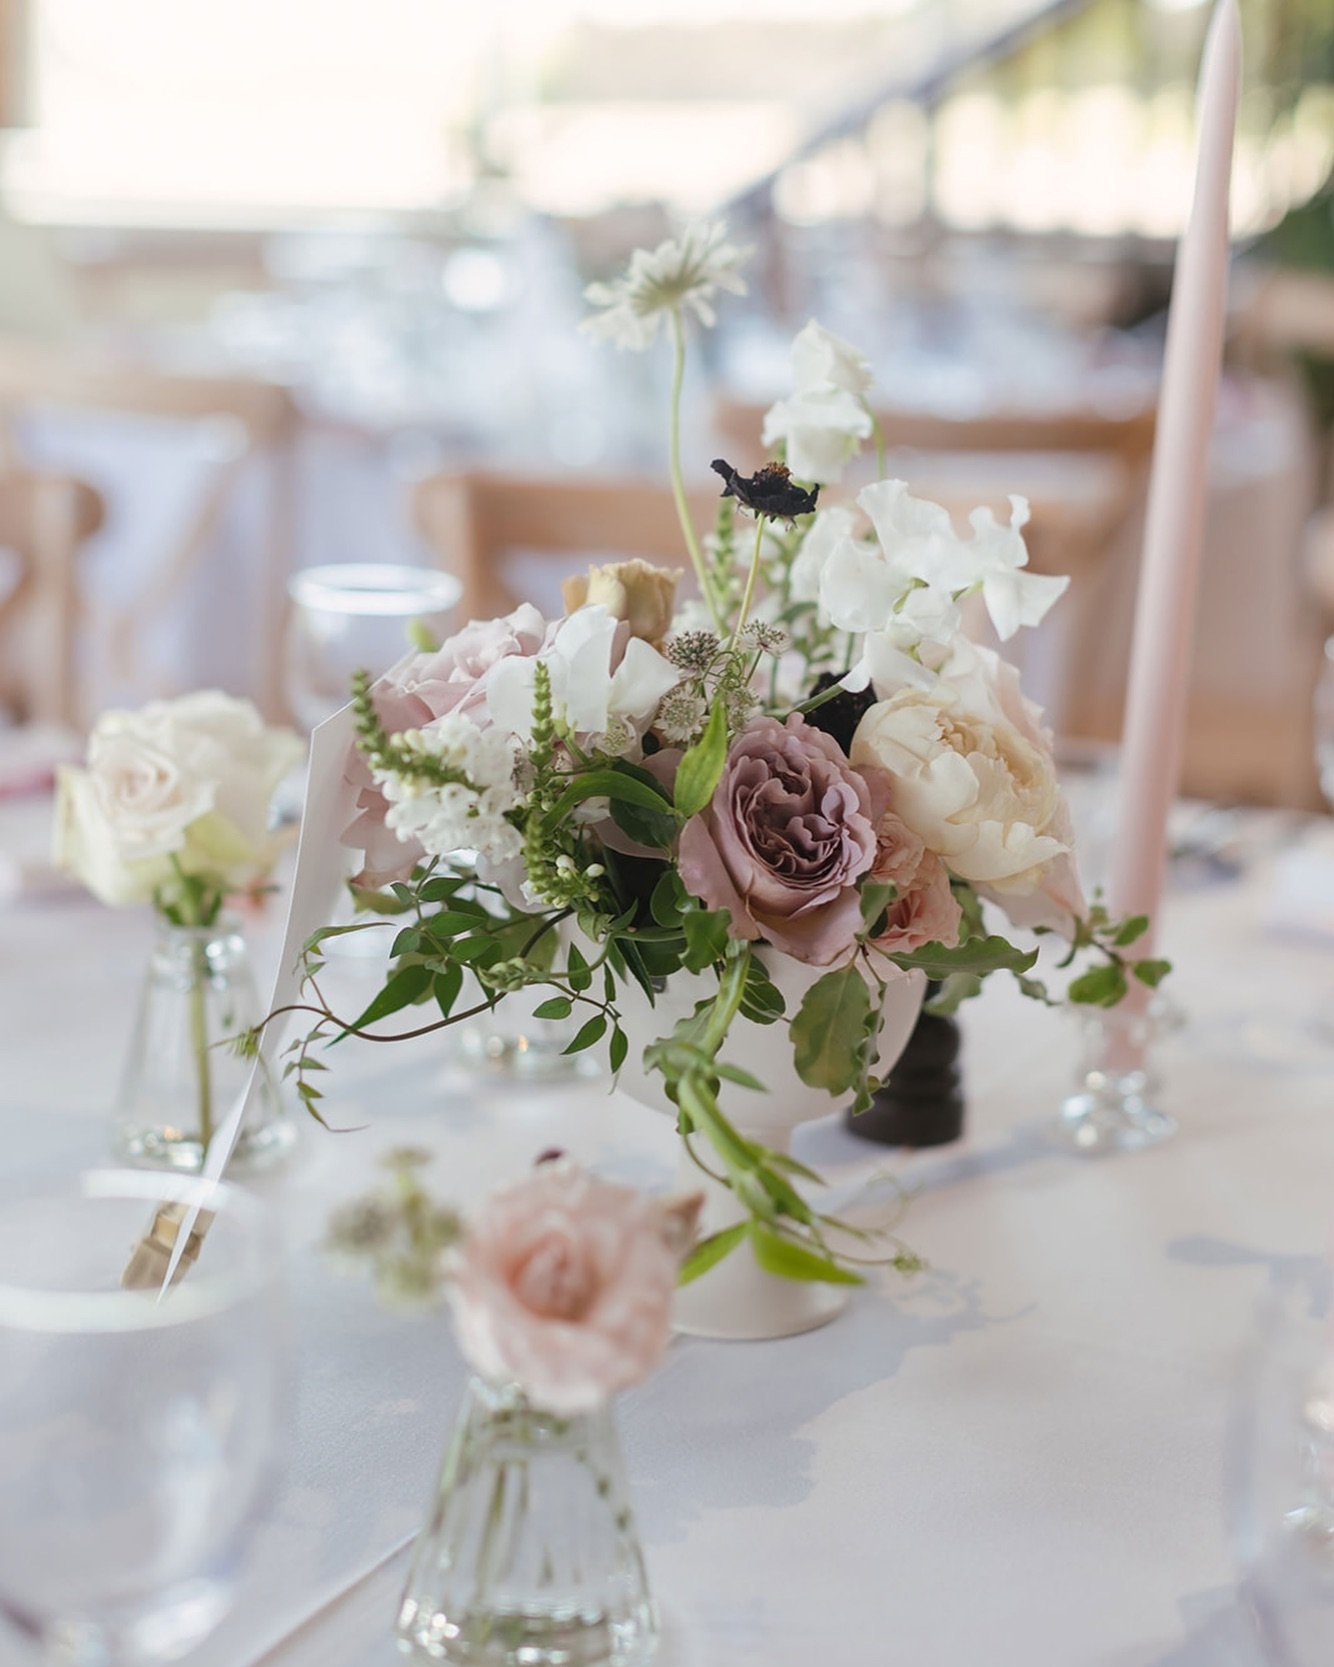 Table centrepieces ~ There are so many options when it comes to your table flowers. From elegant footed bowls to long and low arrangements or even simple budvases, they can transform and elevate your tablescapes along with the table linens, stationer